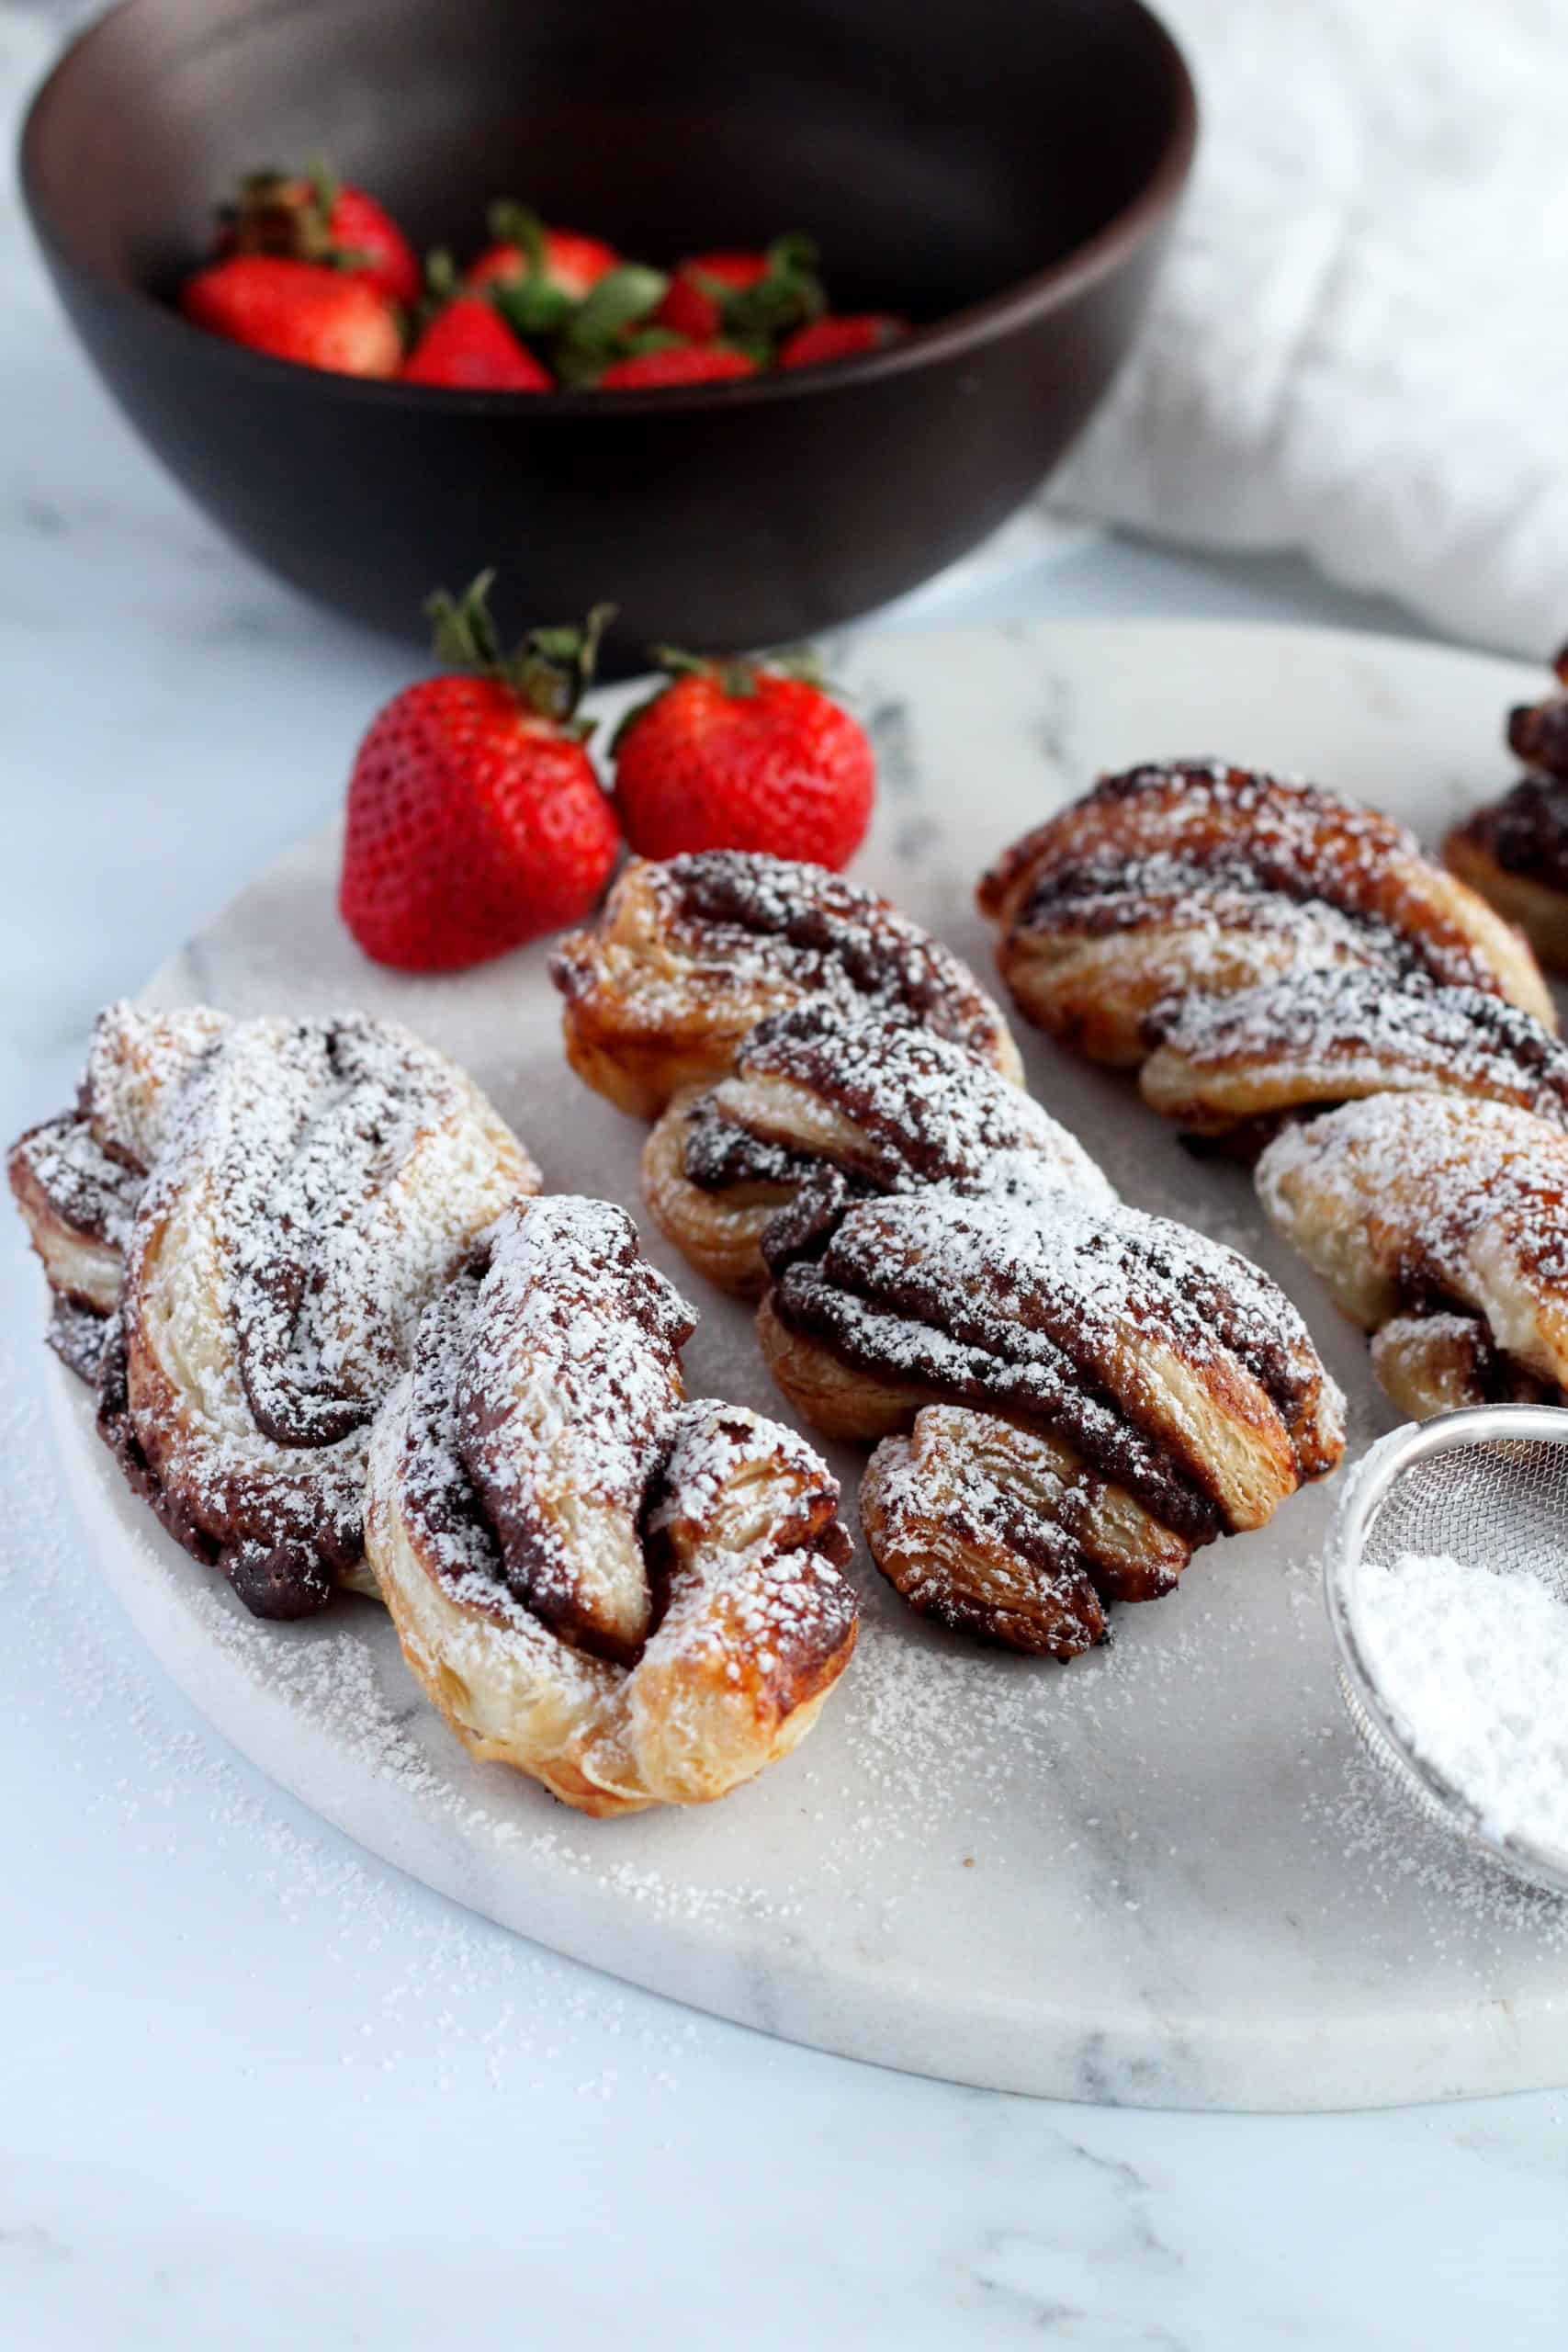 Nutella filled puff pastry twists on marble plate dusted with powdered sugar. In the background are strawberries in wooden bowl